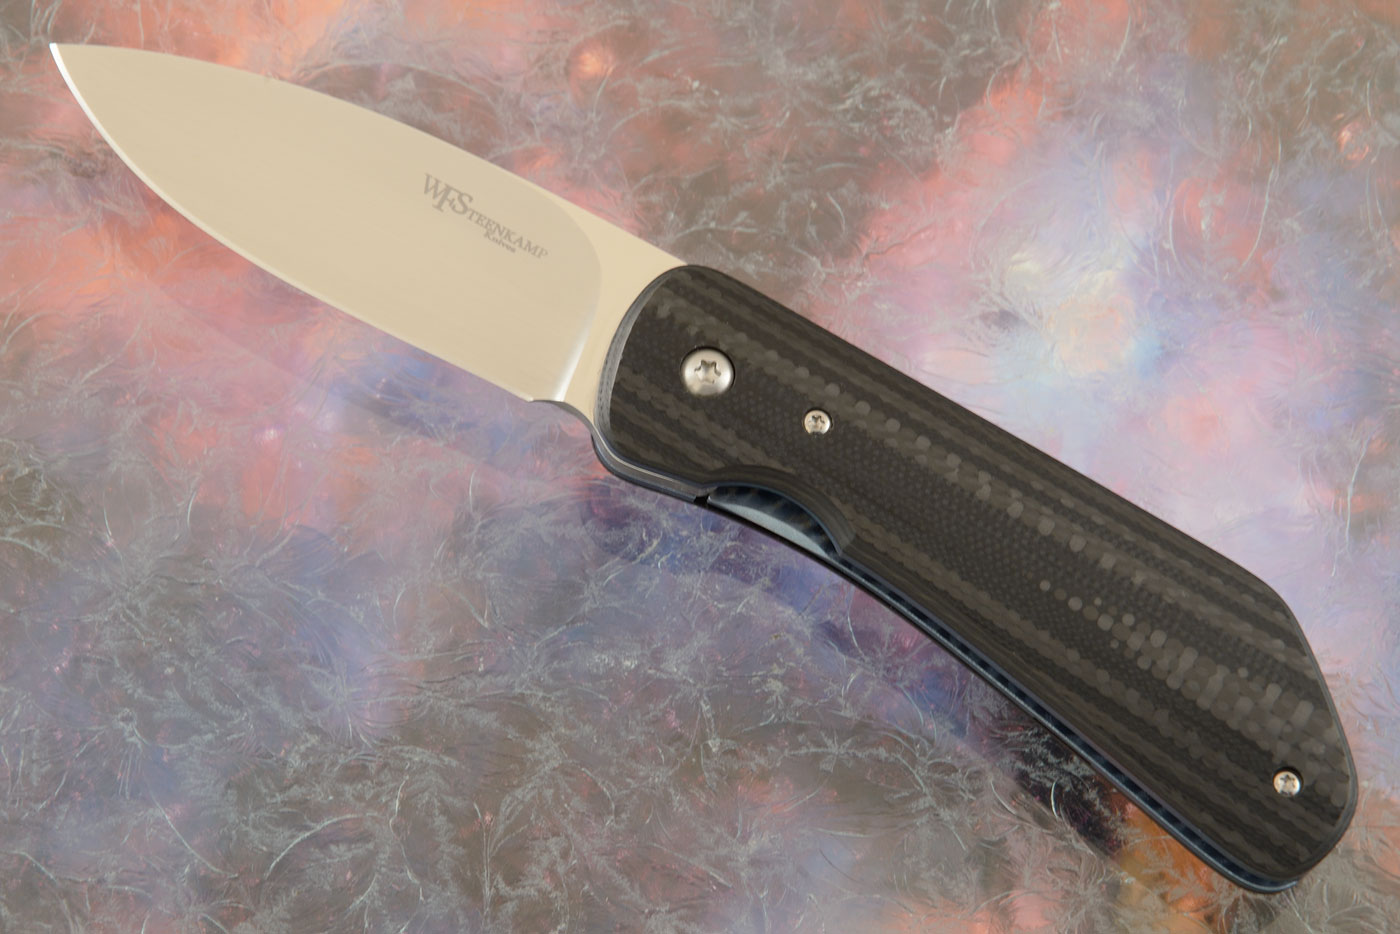 Swift Front Flipper with Stacked Carbon Fiber and G-10 (IKBS)